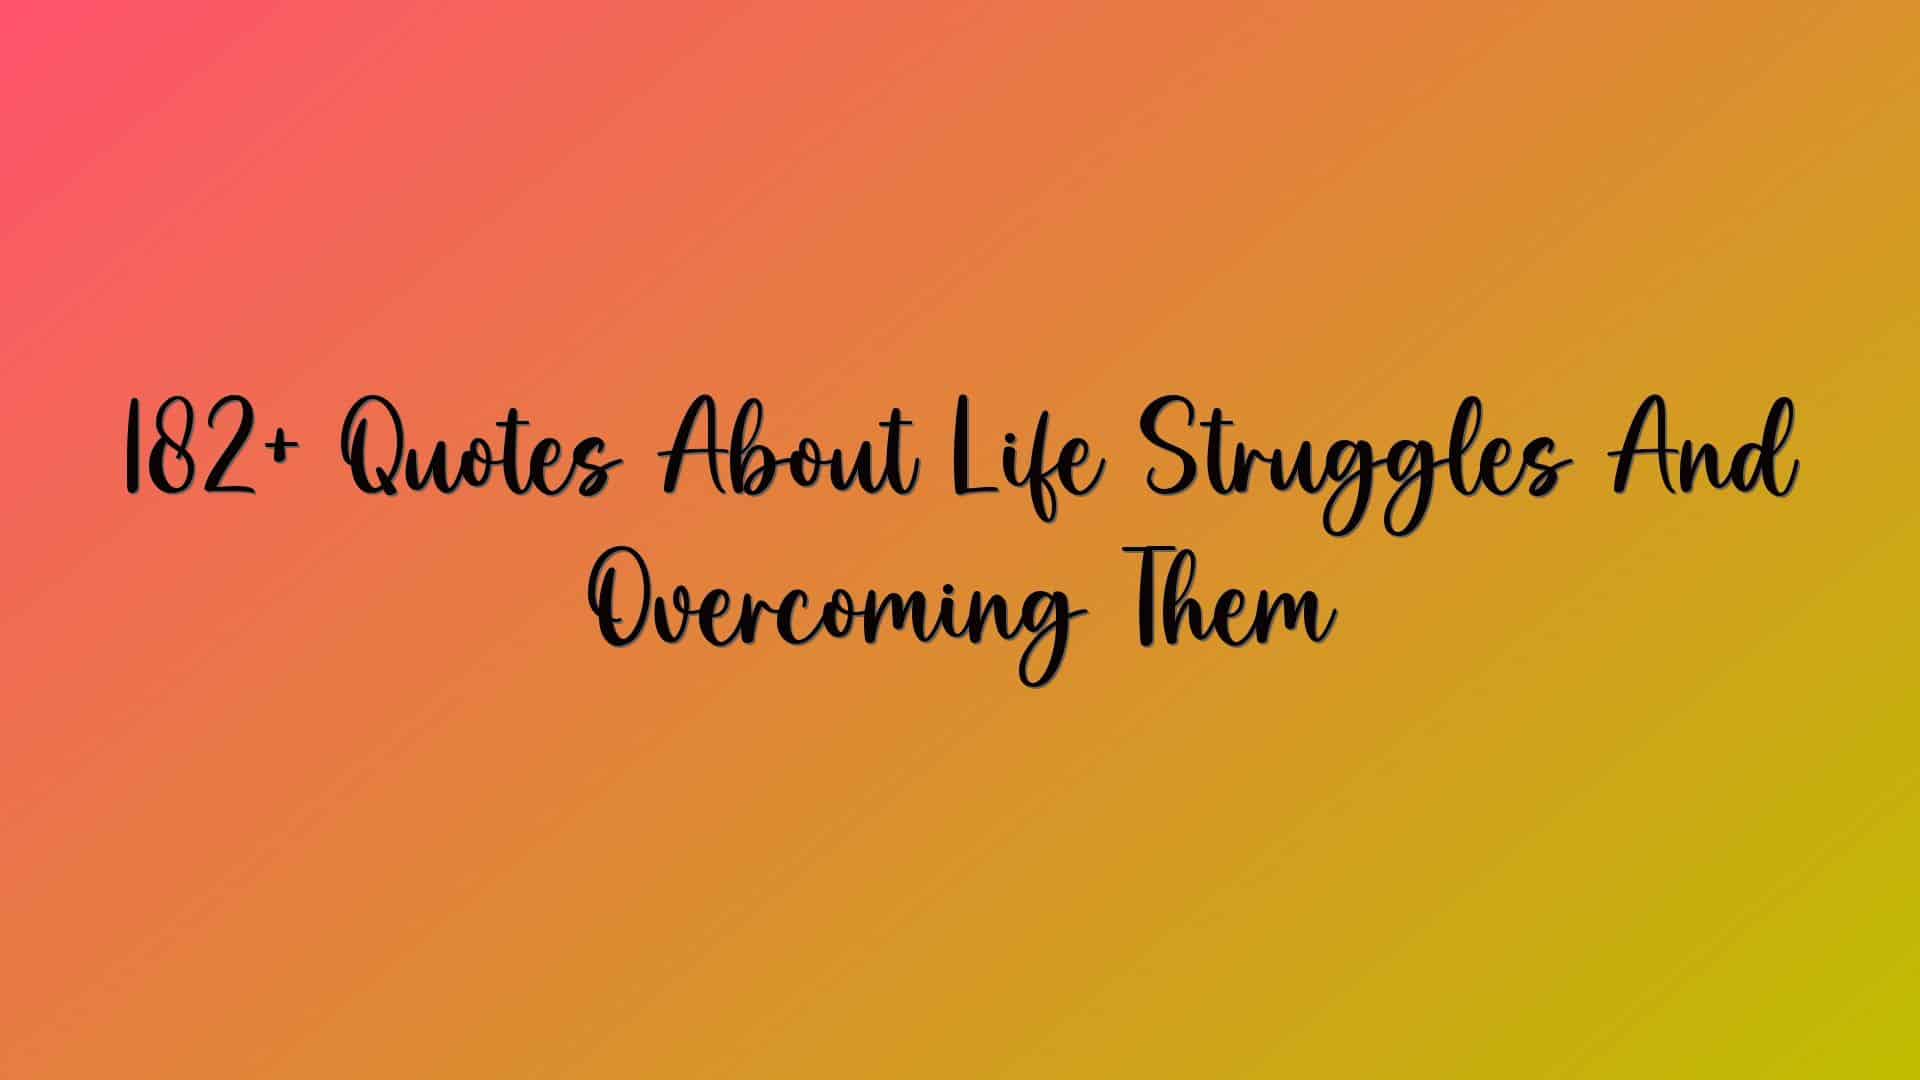 182+ Quotes About Life Struggles And Overcoming Them